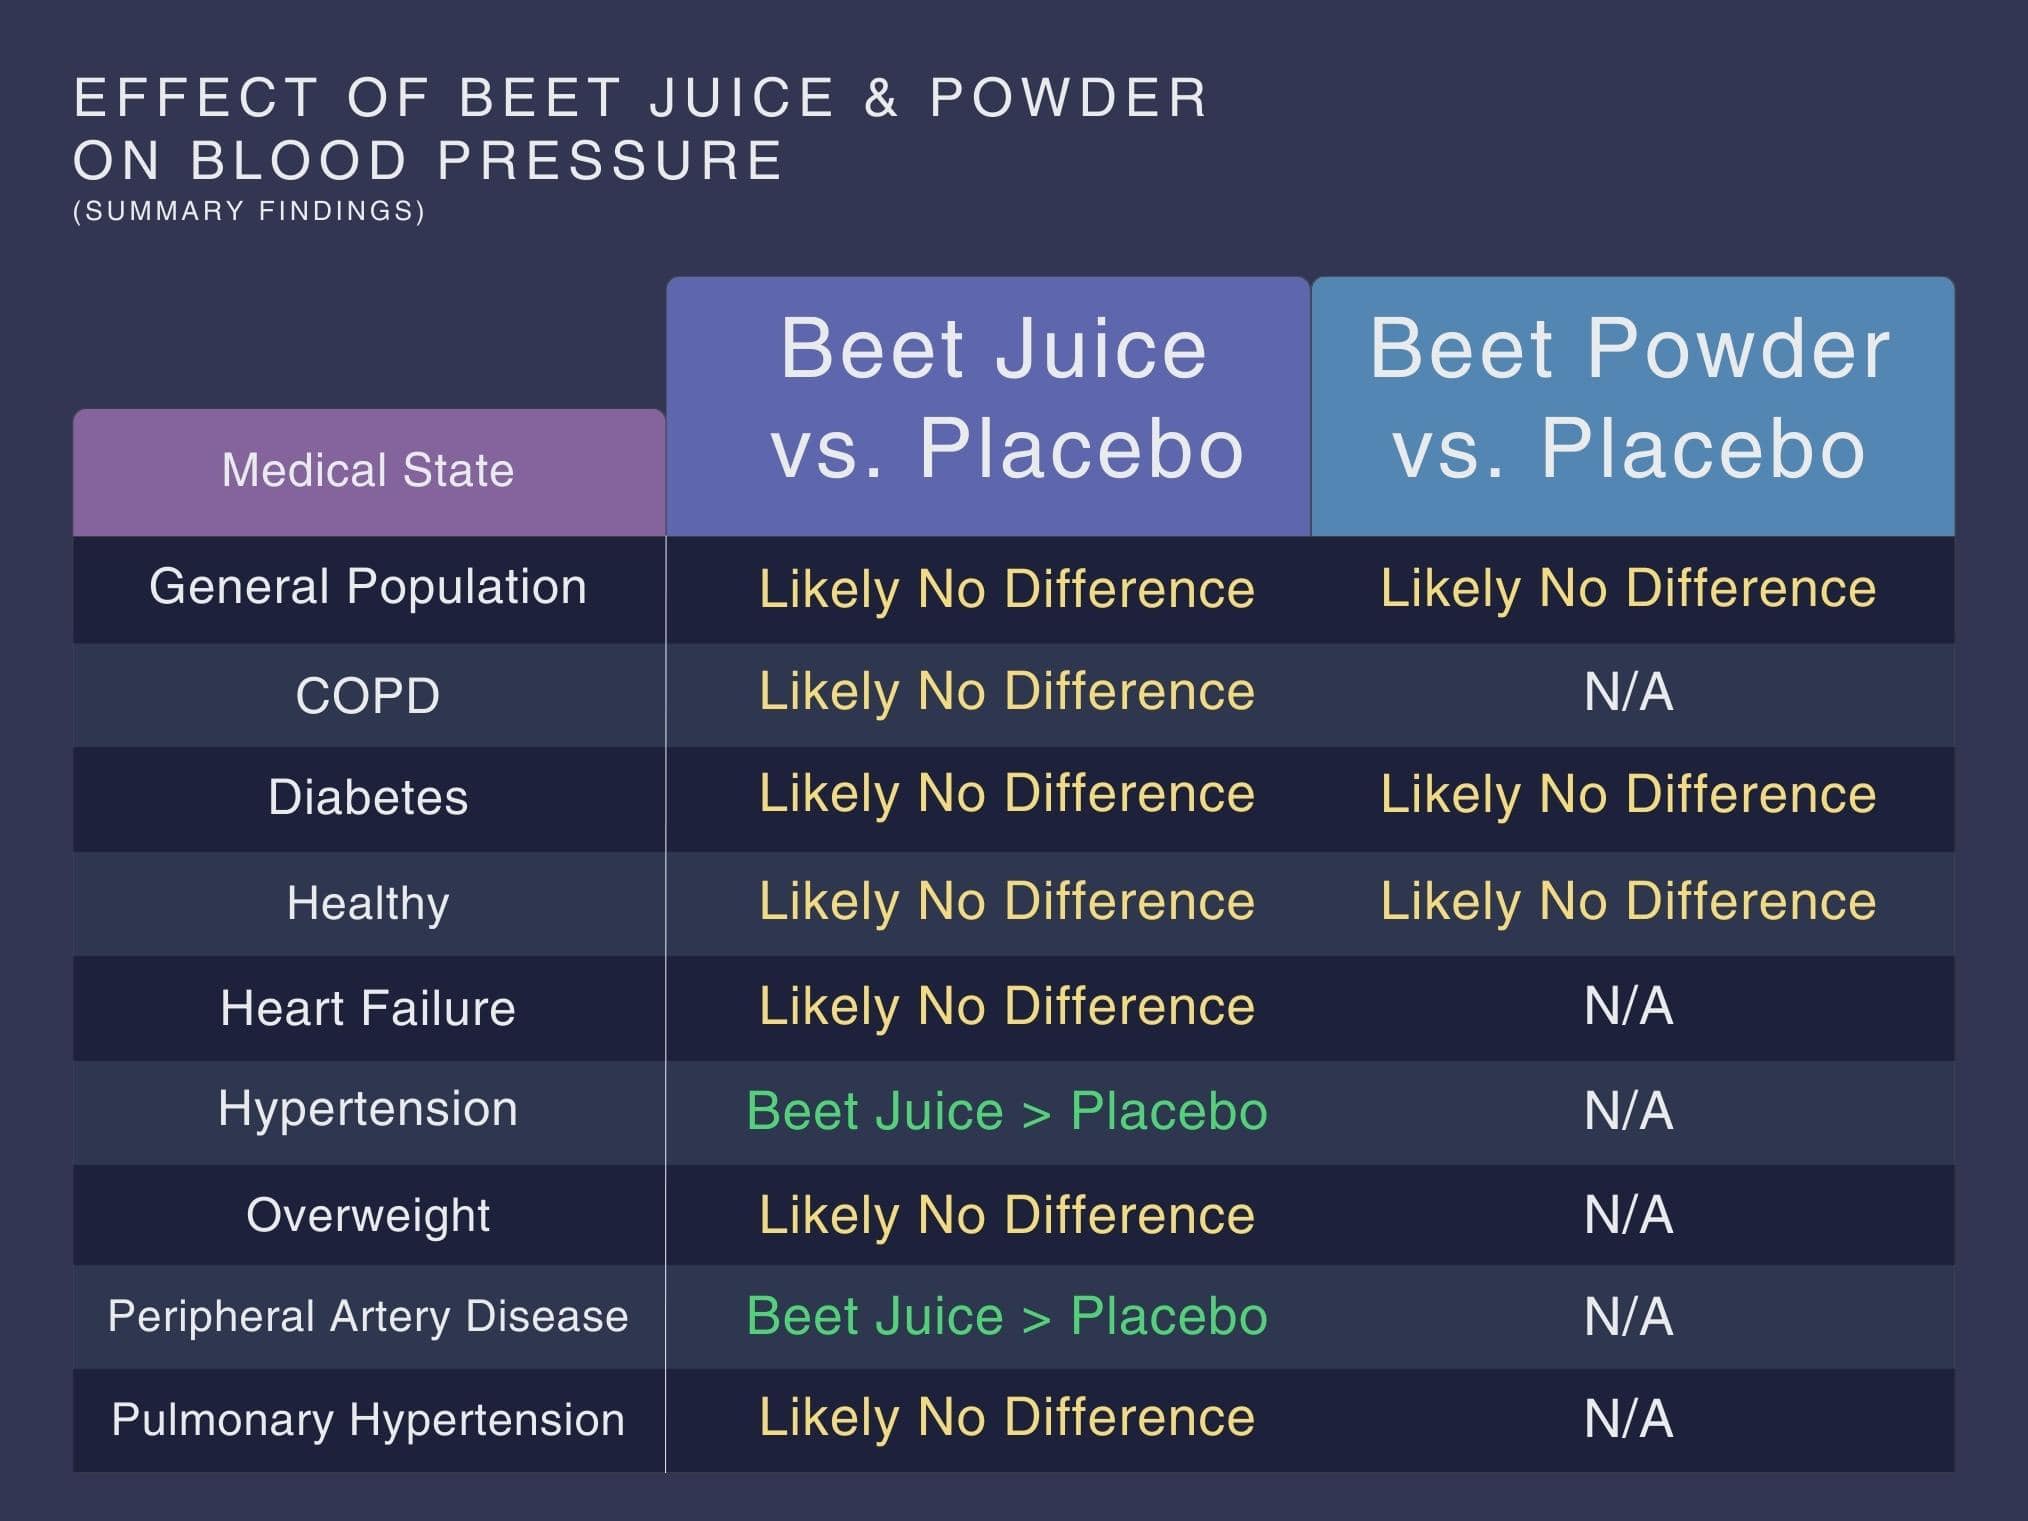 This image shows a table comparing the blood pressure effect of beet juice vs. placebo and beet powder vs. placebo. It shows that beet juice is likely neither more nor less effective than placebo at lowering the blood pressure of adults in the general population, COPD, diabetes, heart failure, overweight, or pulmonary hypertension. It shows that beet juice may be more effective than placebo at lowering the blood pressure of people with hypertension (high blood pressure) and peripheral artery disease.